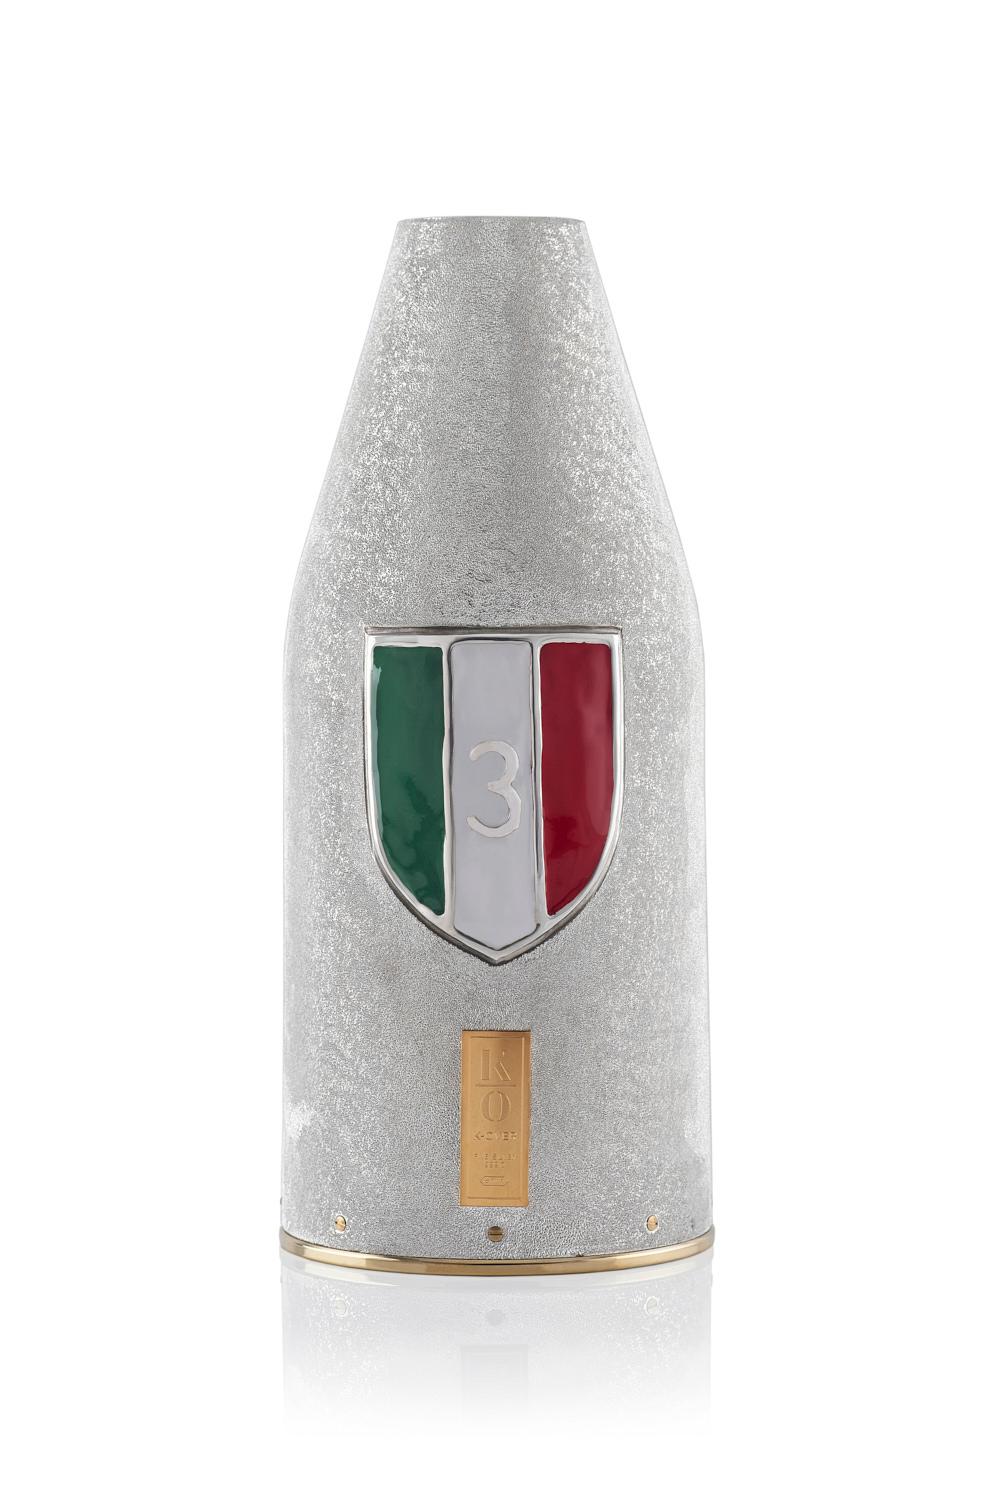 NAPOLI CHAMPION OF ITALY :
Our K-OVERs, are alternatives to the champagne bucket and the more common glacette.  The precious metal that holds the bottle is coated internally with a thermal fabric that maintains the temperature of your champagne for